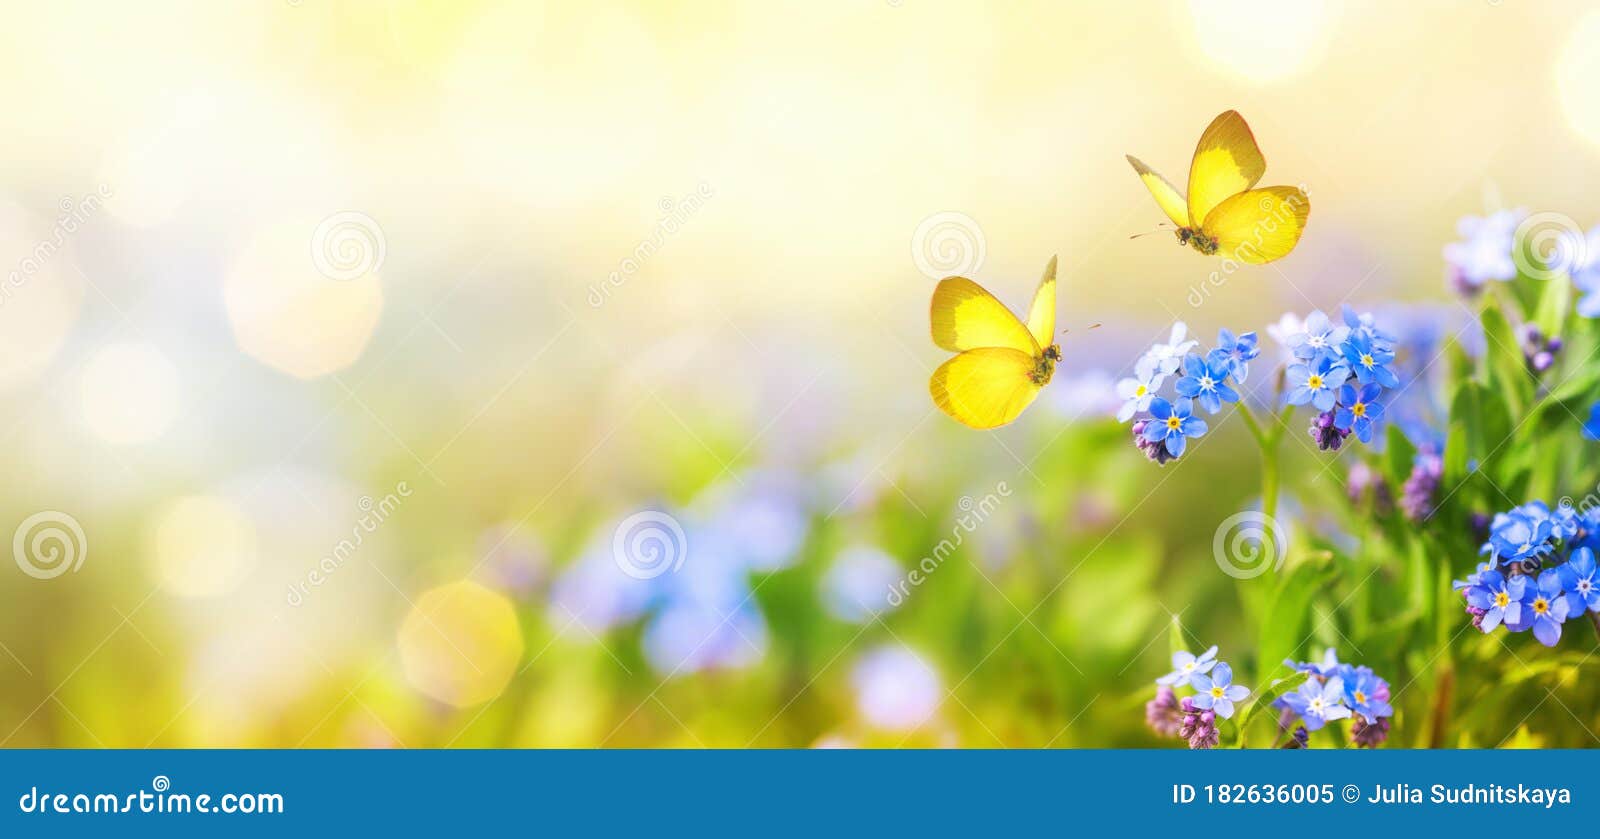 beautiful summer or spring meadow with blue flowers of forget-me-nots and two flying butterflies. wild nature landscape